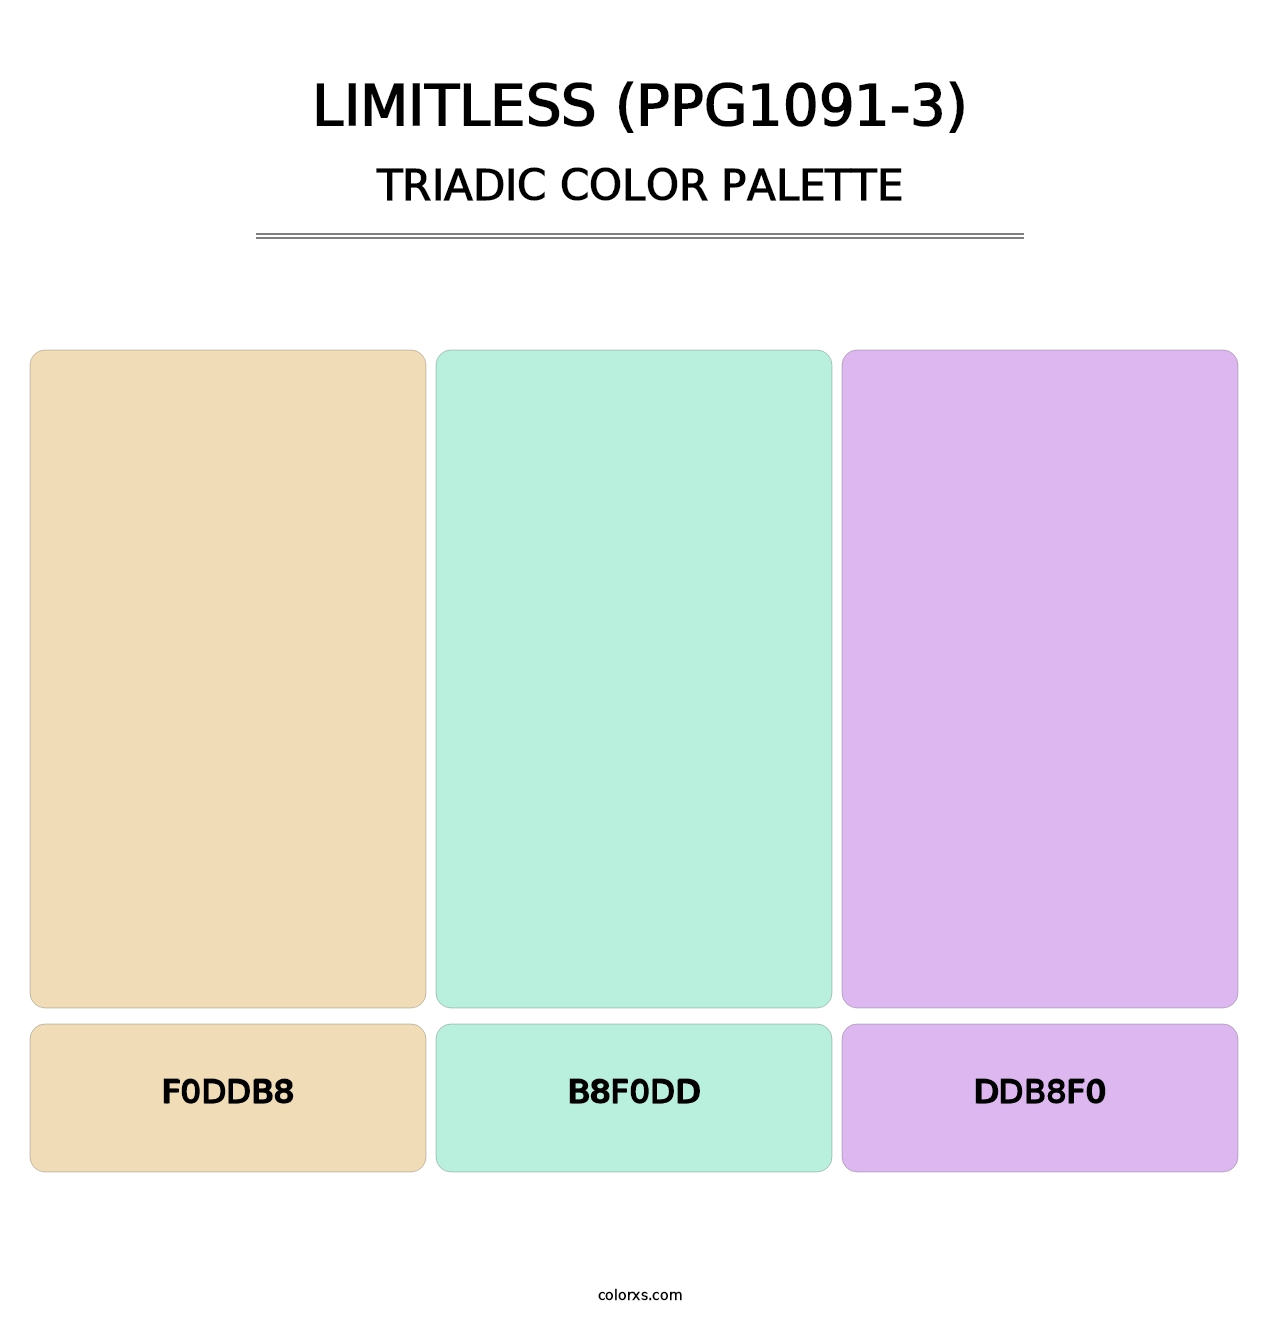 Limitless (PPG1091-3) - Triadic Color Palette